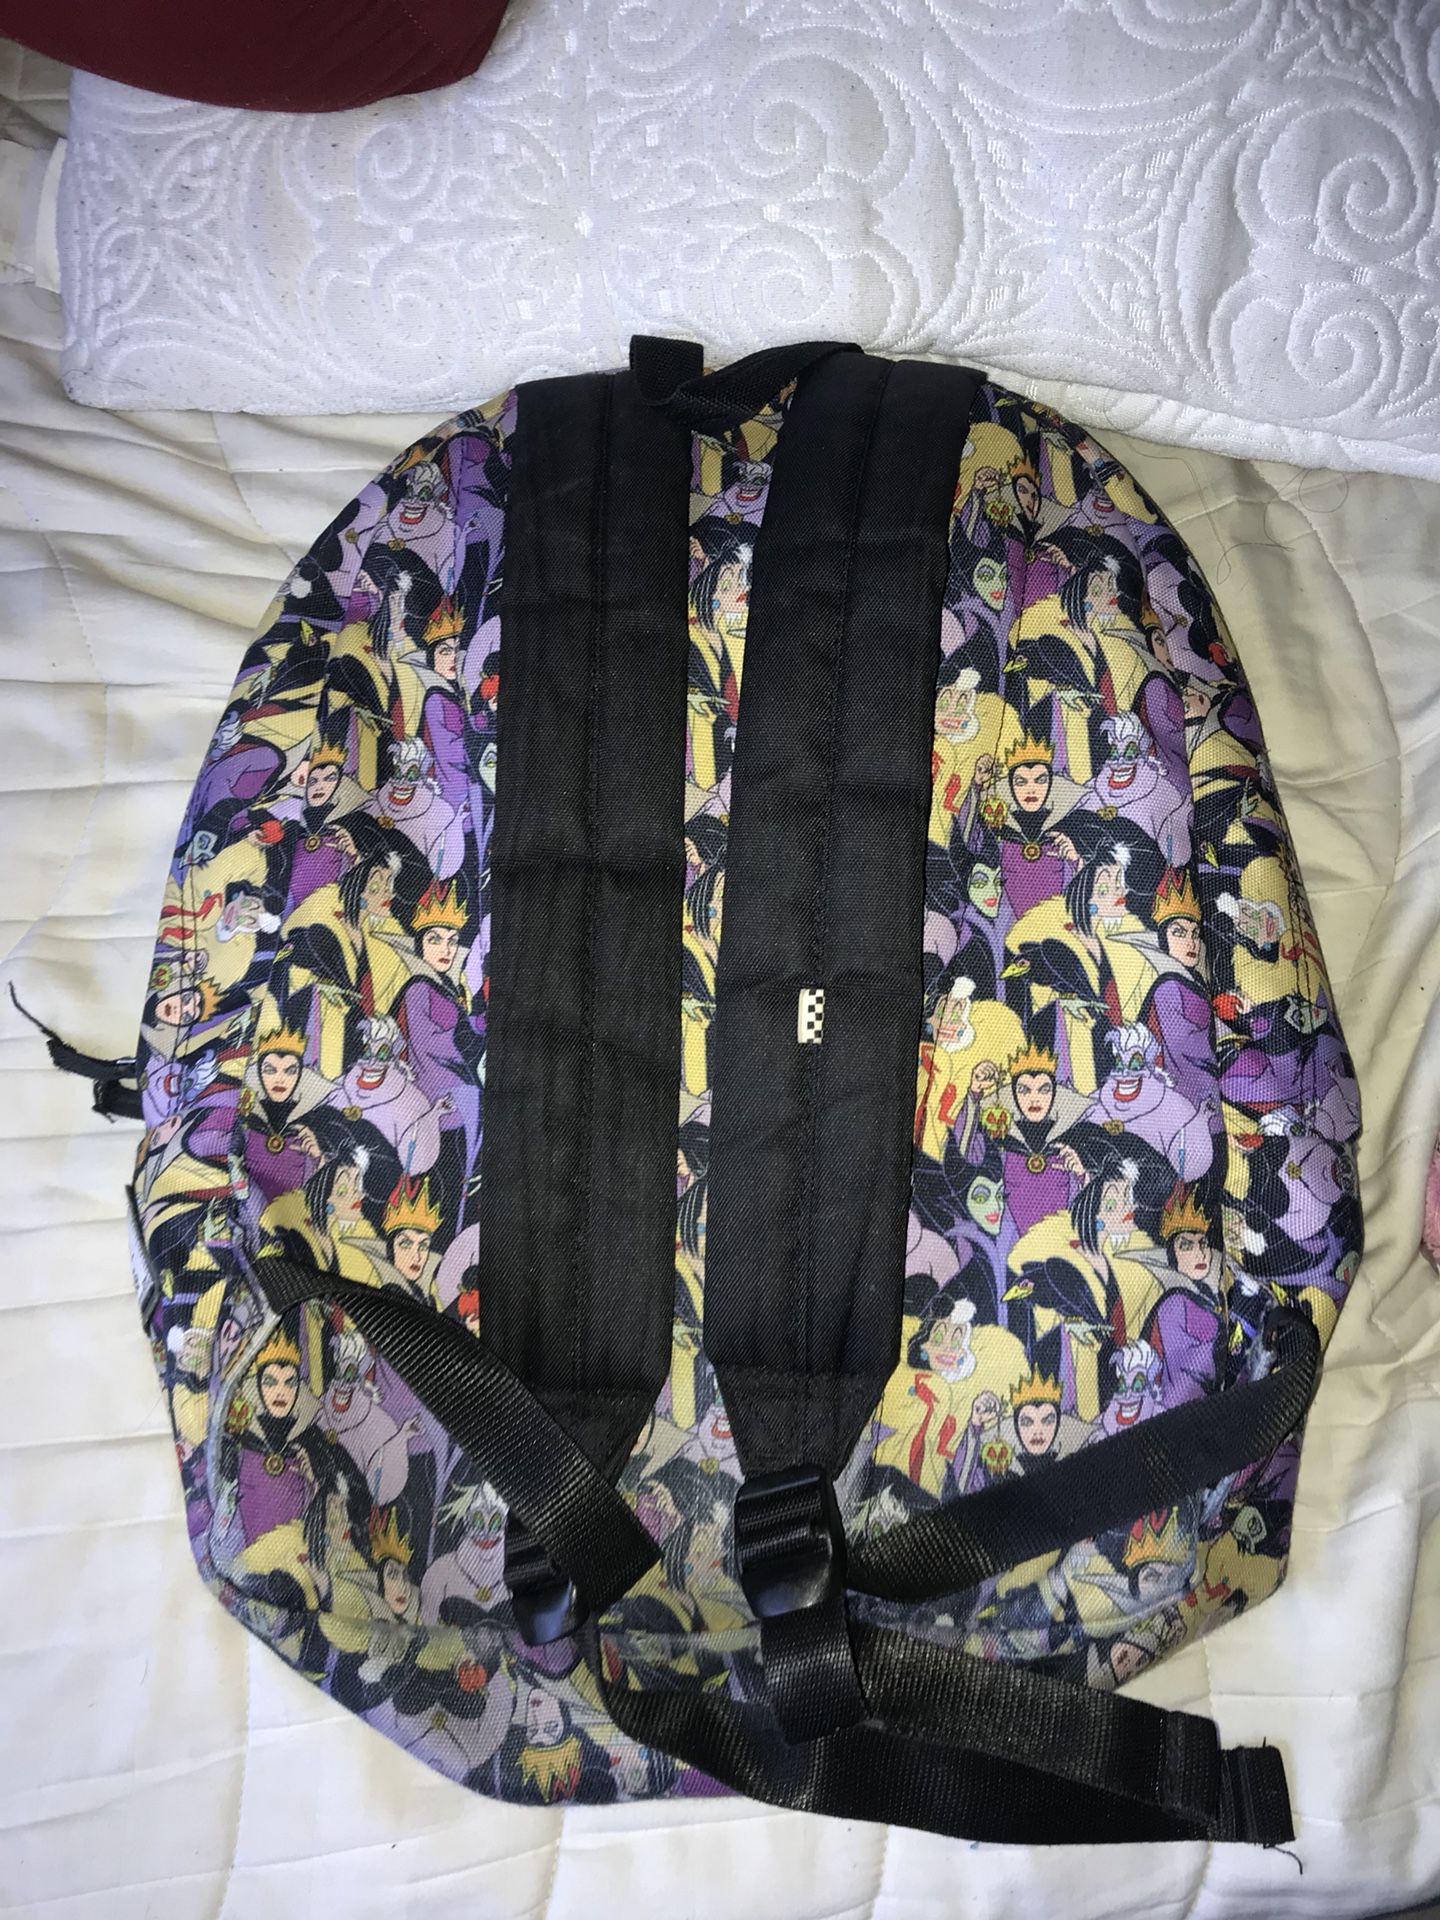 Vans and Jan sports backpacks great condition Coral Springs 33071 $20 each  for Sale in Pompano Beach, FL - OfferUp